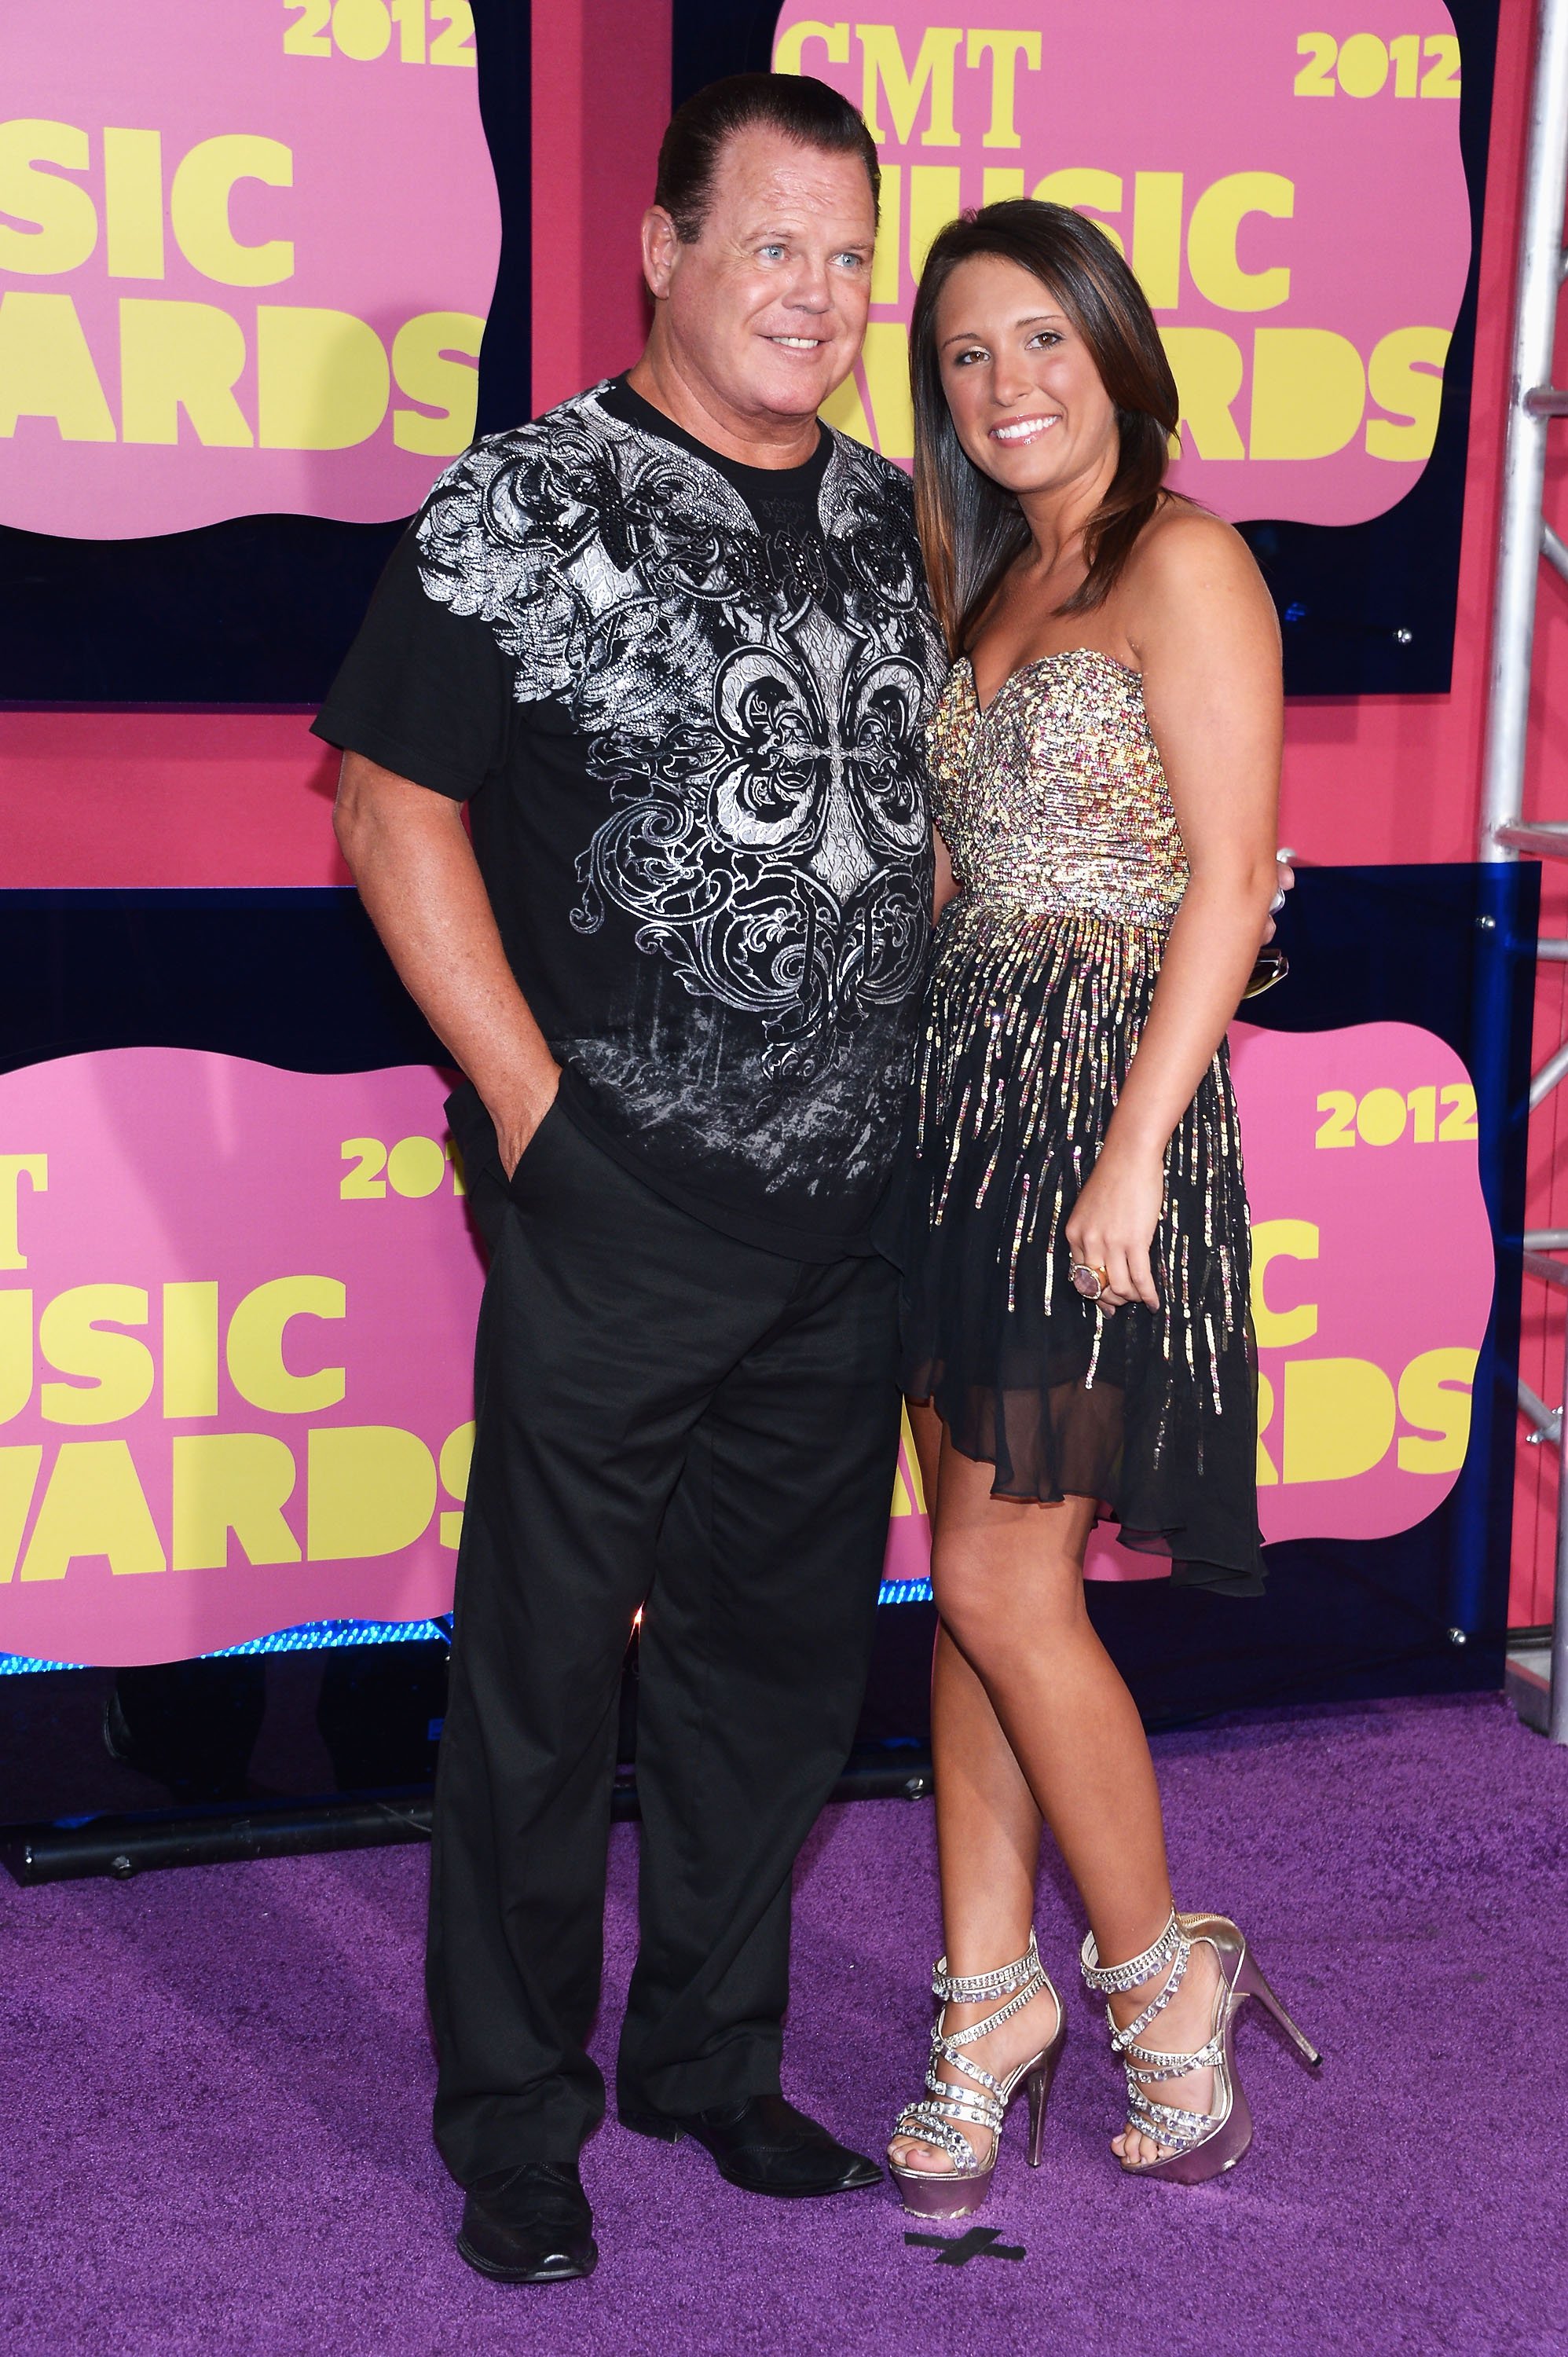  Jerry Lawler and Lauryn McBride at the Bridgestone Arena on June 6, 2012, in Nashville, Tennessee. | Source: Getty Images